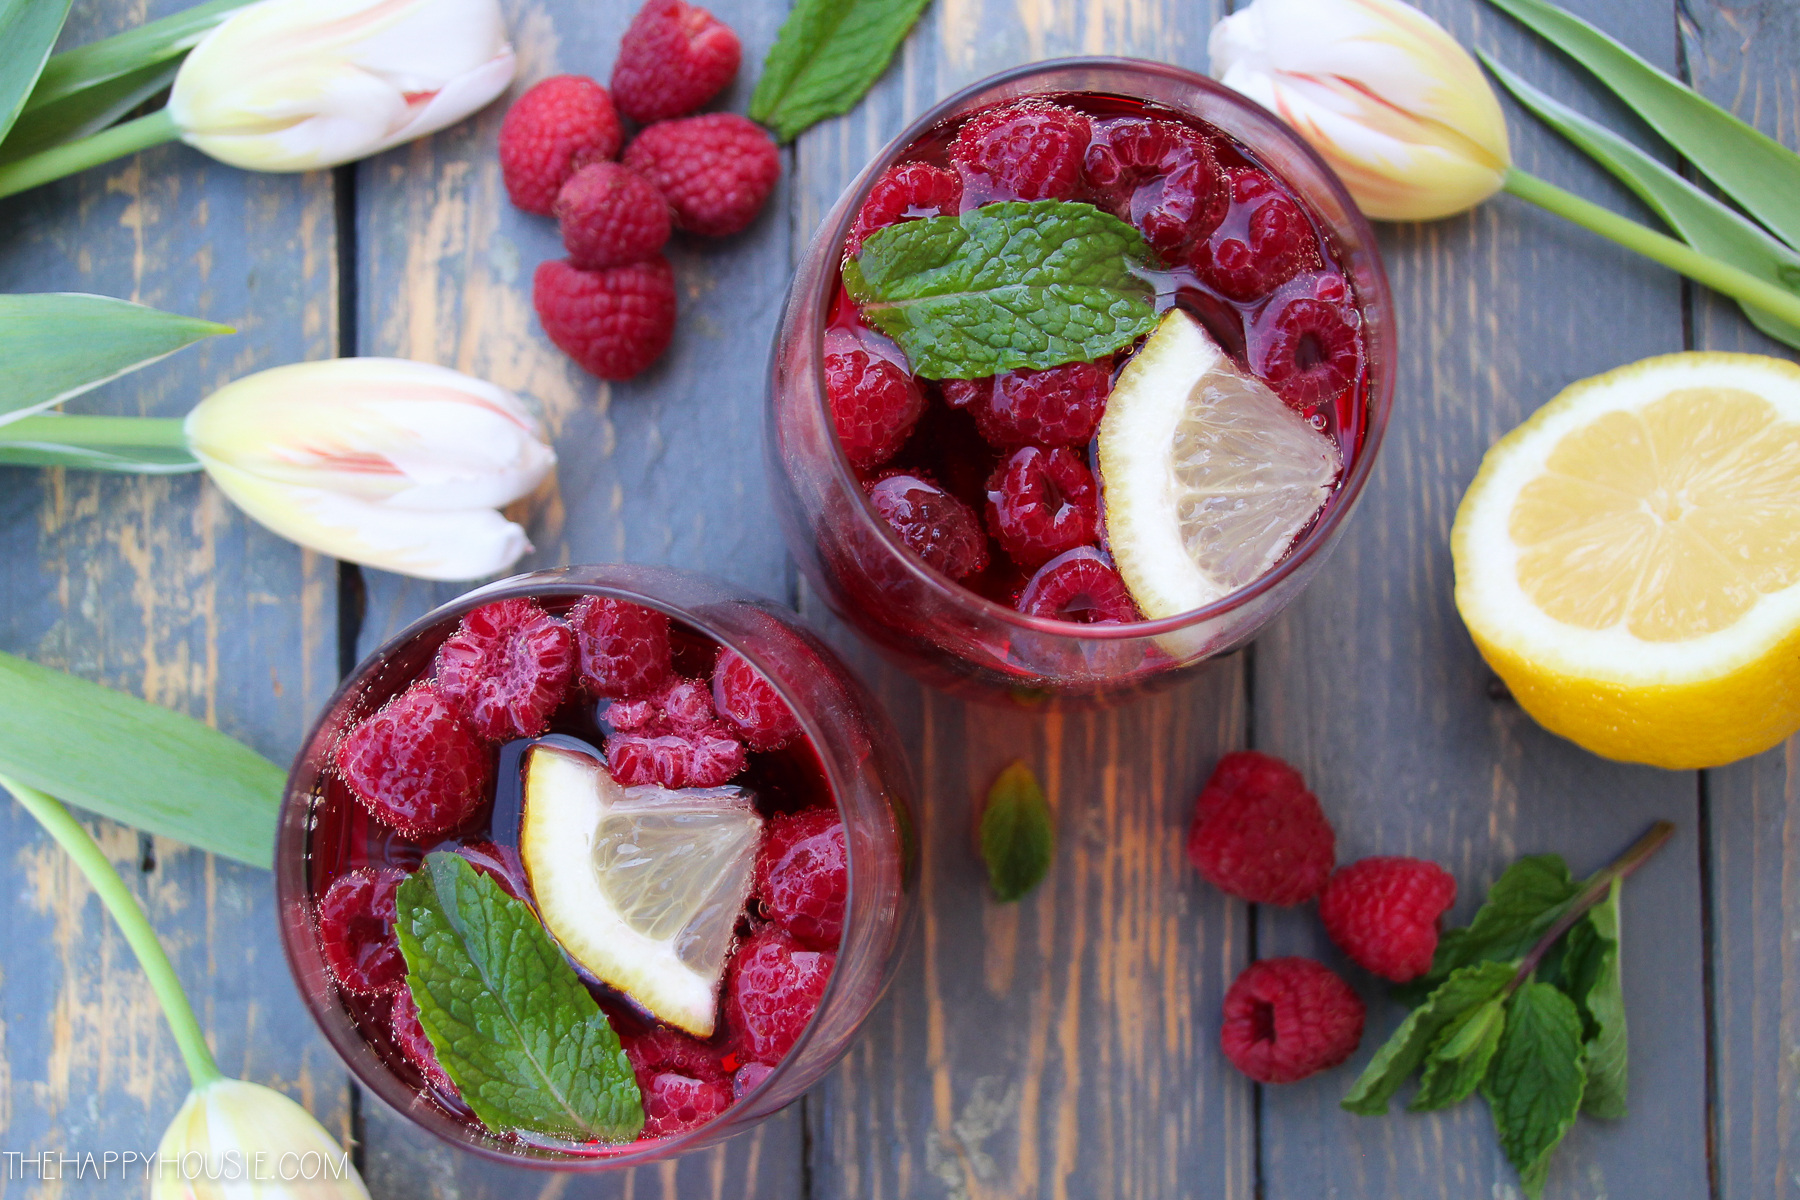 The wine and juice is added to the berries in the glass.